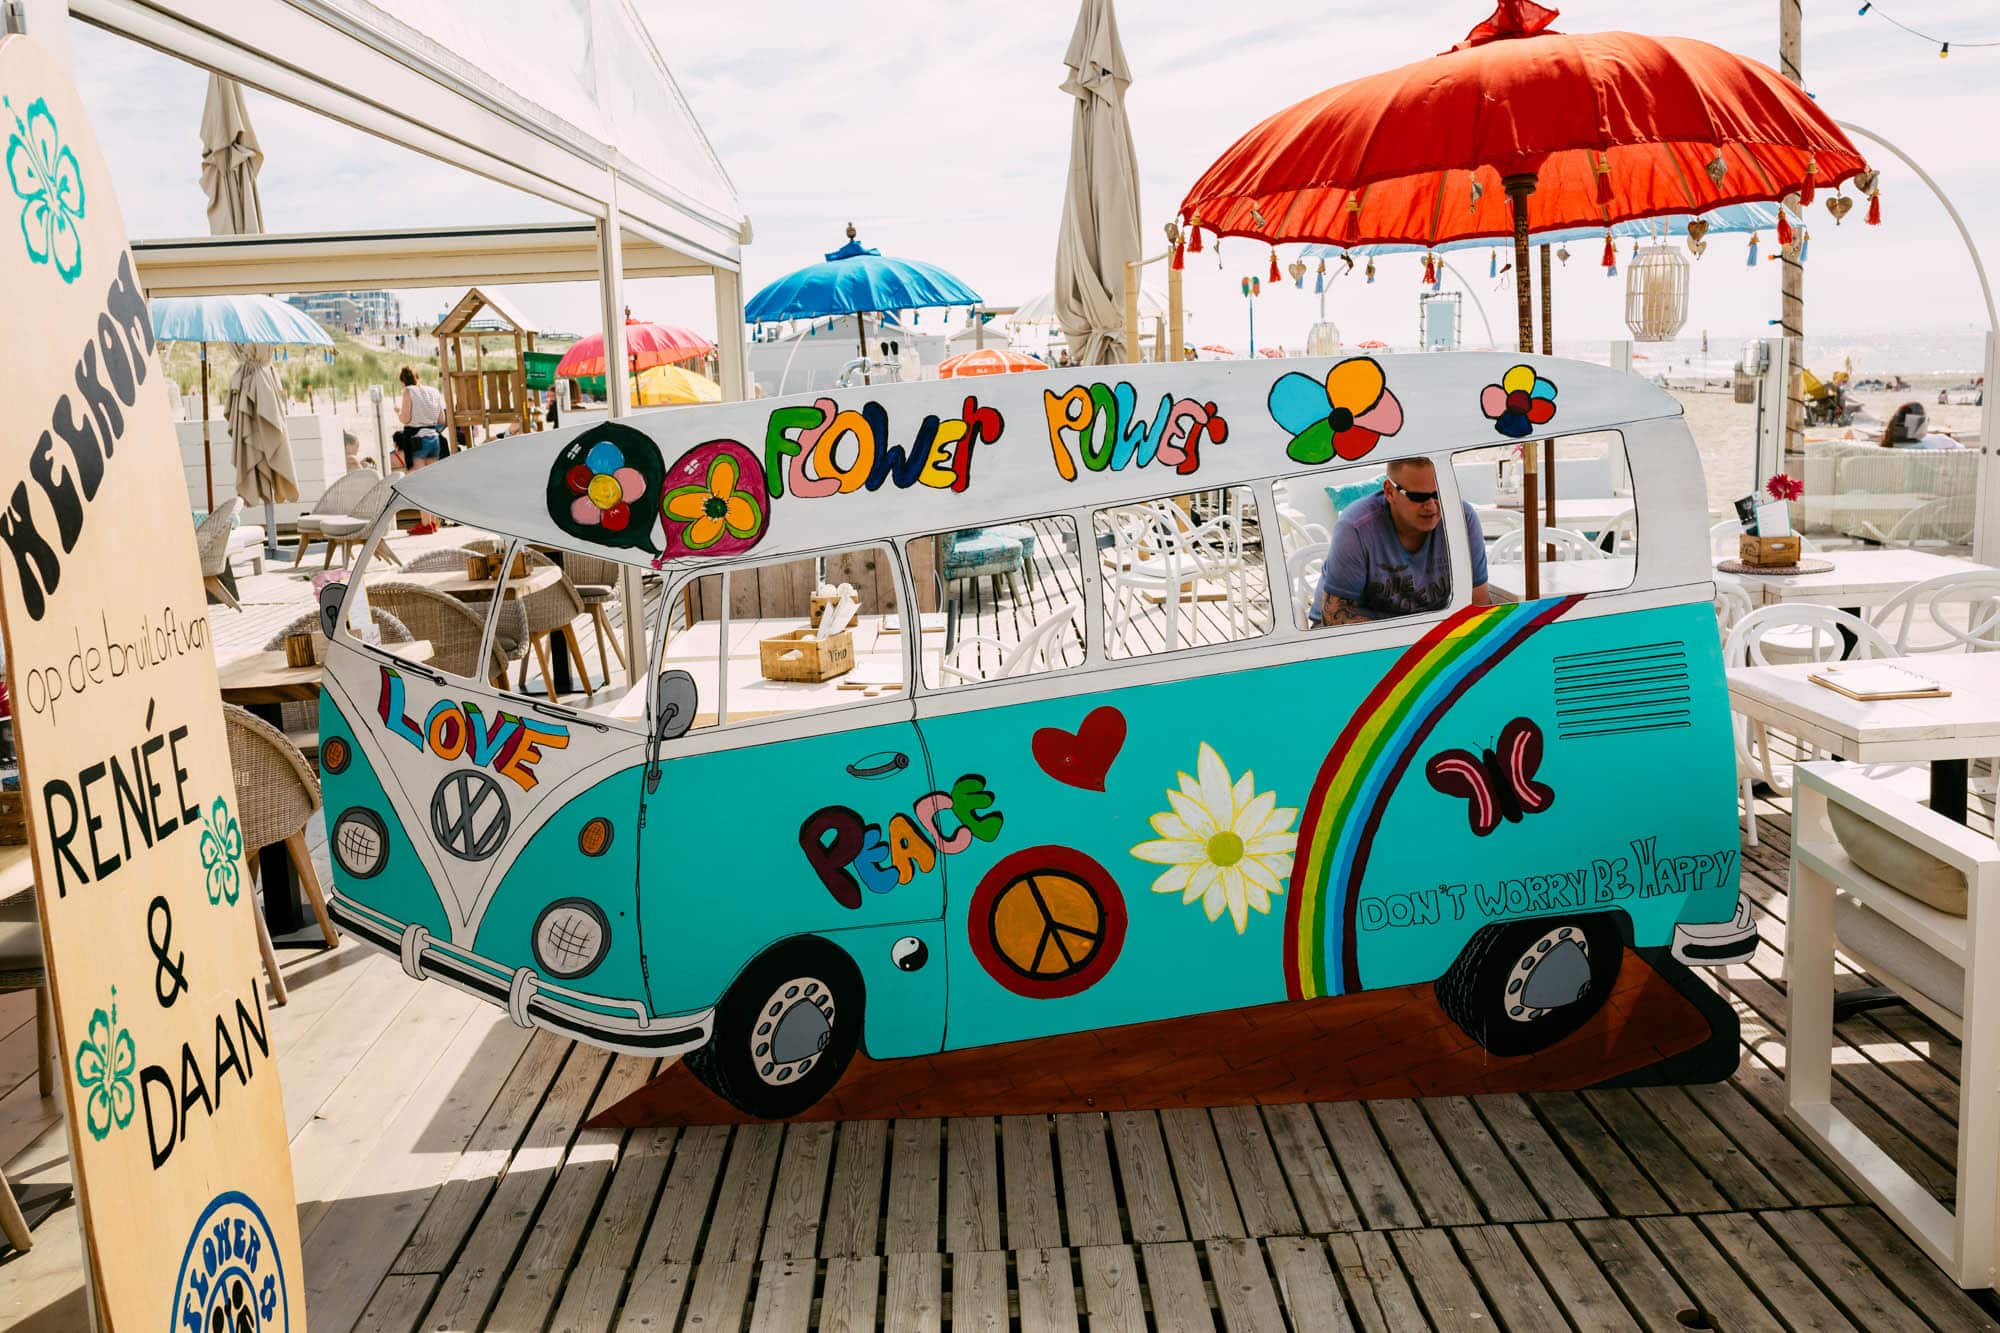 A VW bus parked on a wooden deck, perfect for a photo booth for a bridal shower.